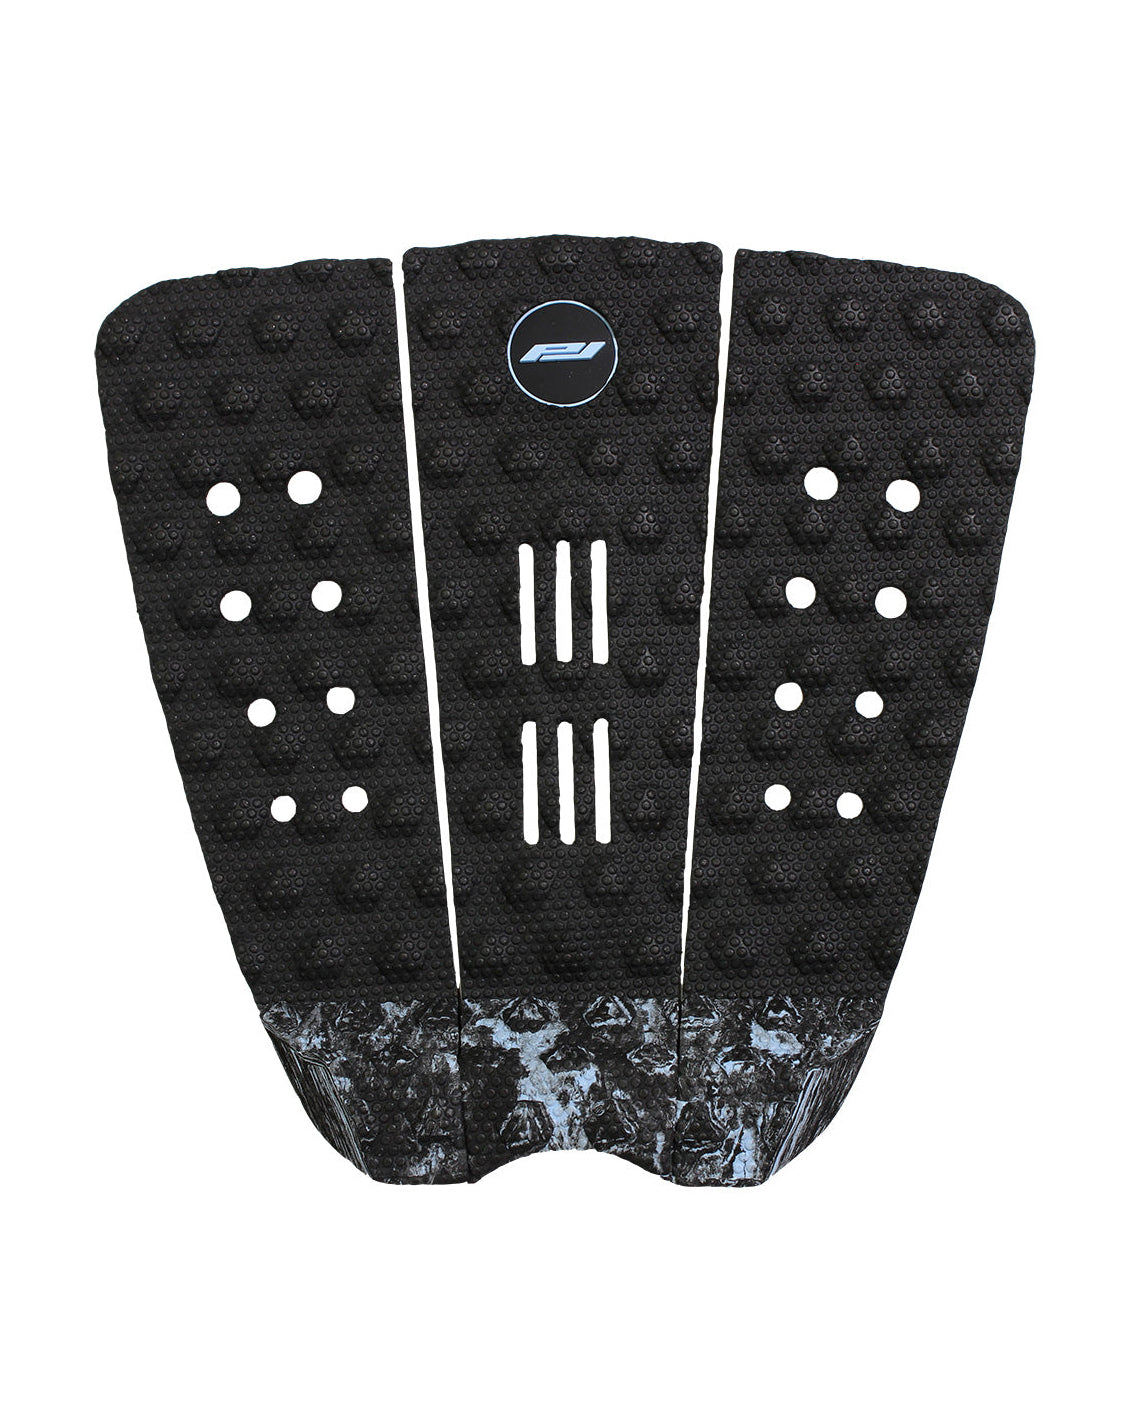 Pro-Lite Timmy Reyes Pro Traction Pad - Micro Dot Black-Black and Light Blue Marble-V1